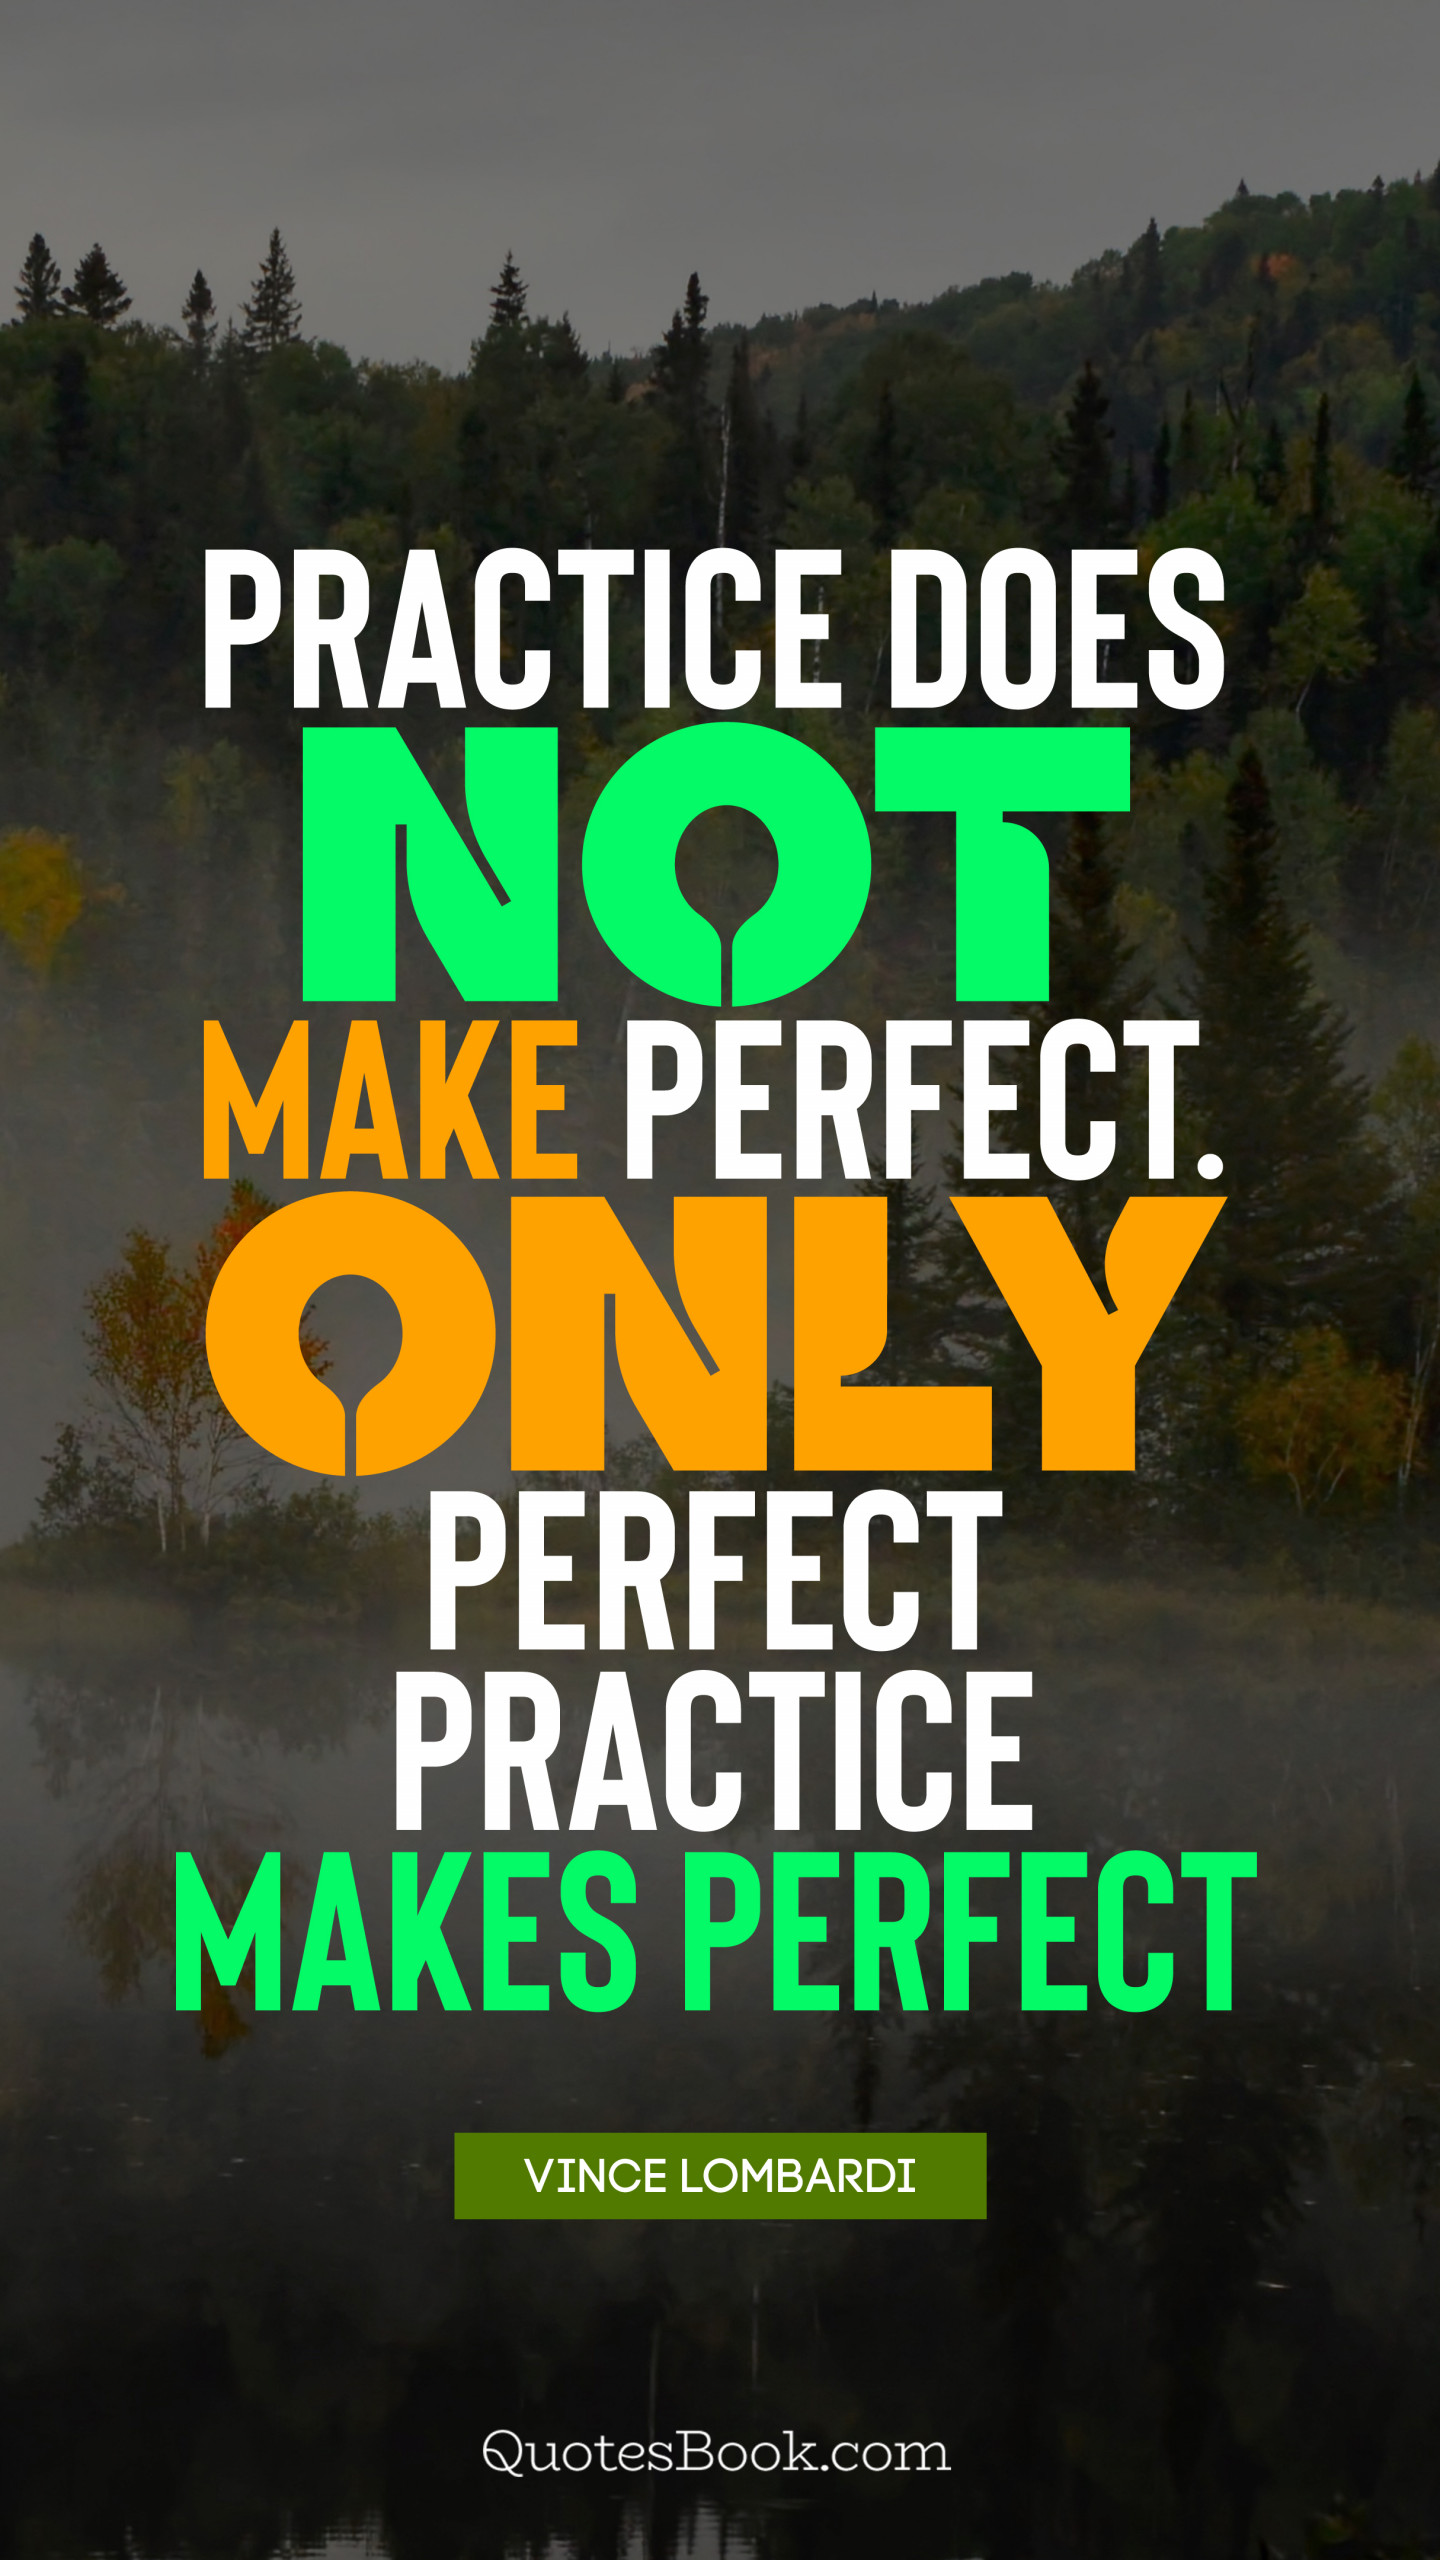 Practice does not make perfect. Only perfect practice makes perfect